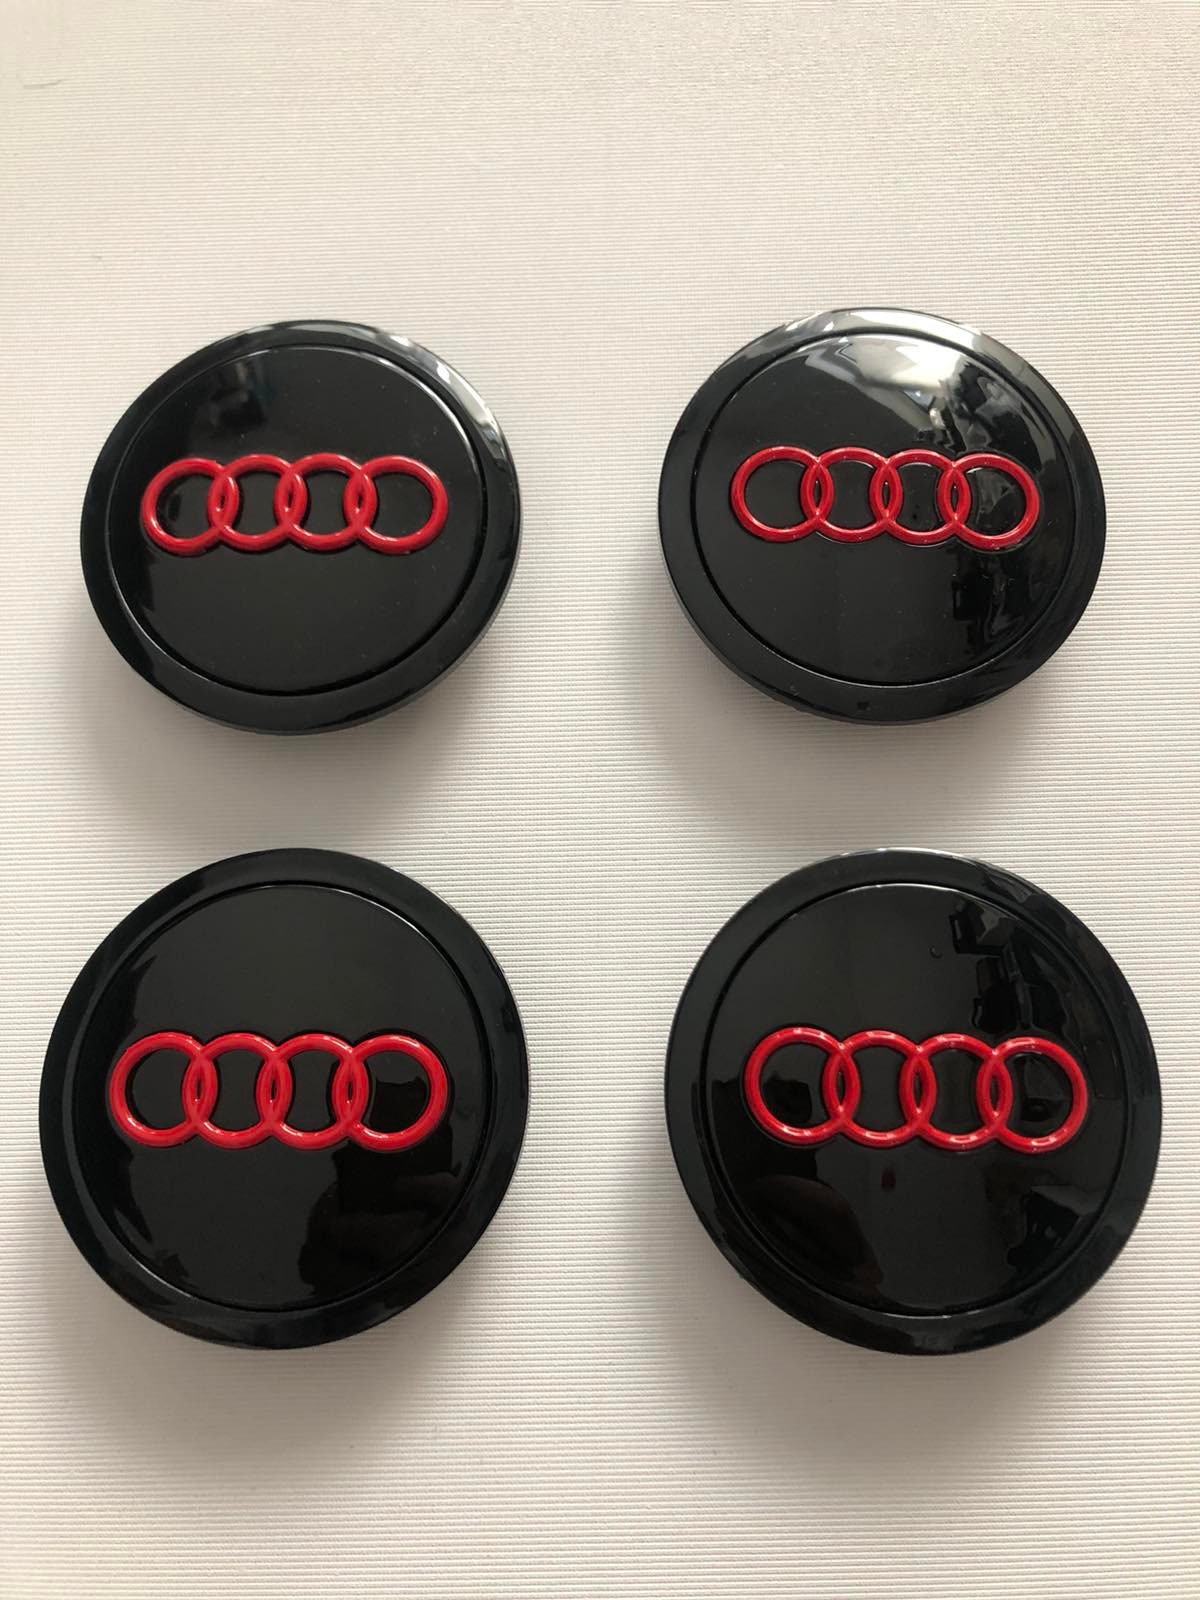 Genuine Audi 8W0-601-170, Center Cap, FREE Shipping on Most Orders $499+  OEMG!